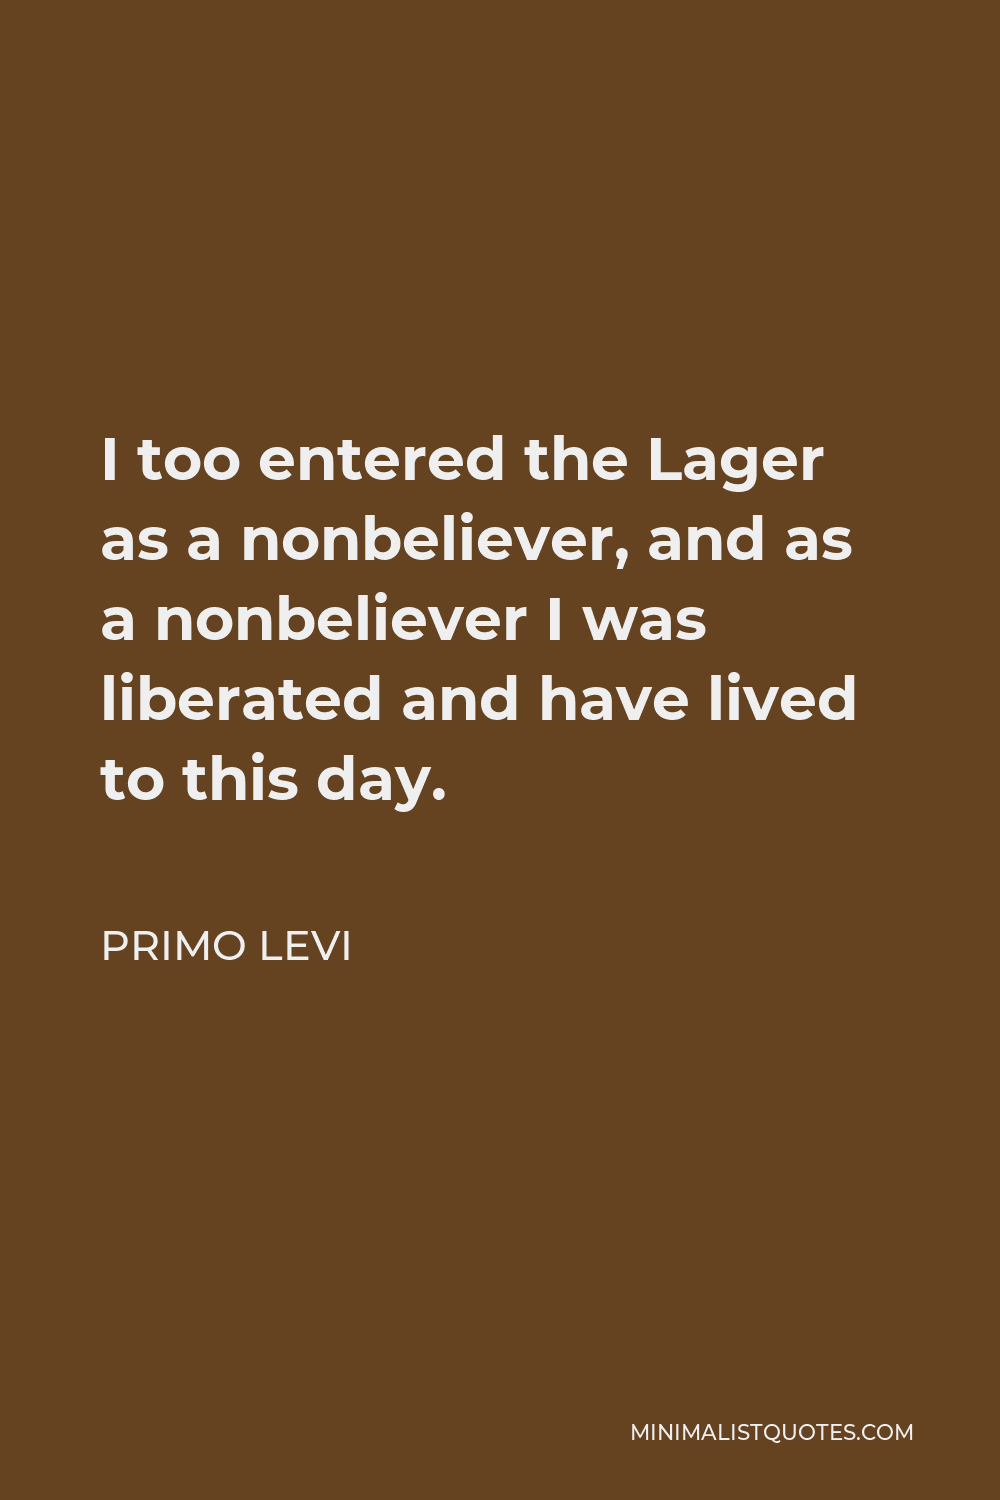 Primo Levi Quote - I too entered the Lager as a nonbeliever, and as a nonbeliever I was liberated and have lived to this day.